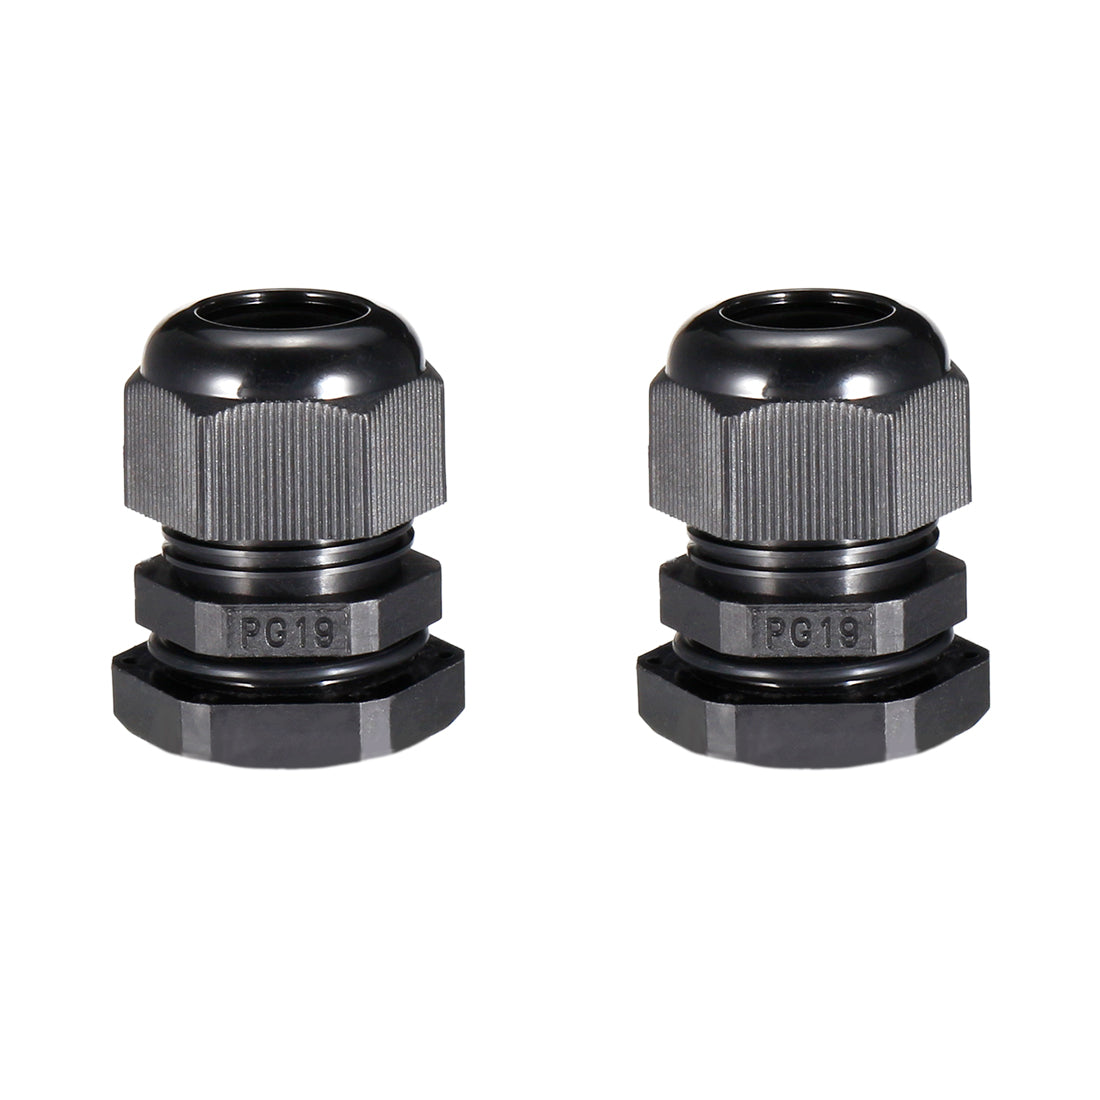 uxcell Uxcell PG19 Cable Gland Waterproof Plastic Joint Adjustable Locknut Black for 12mm-15mm Dia Cable Wire 2 Pcs